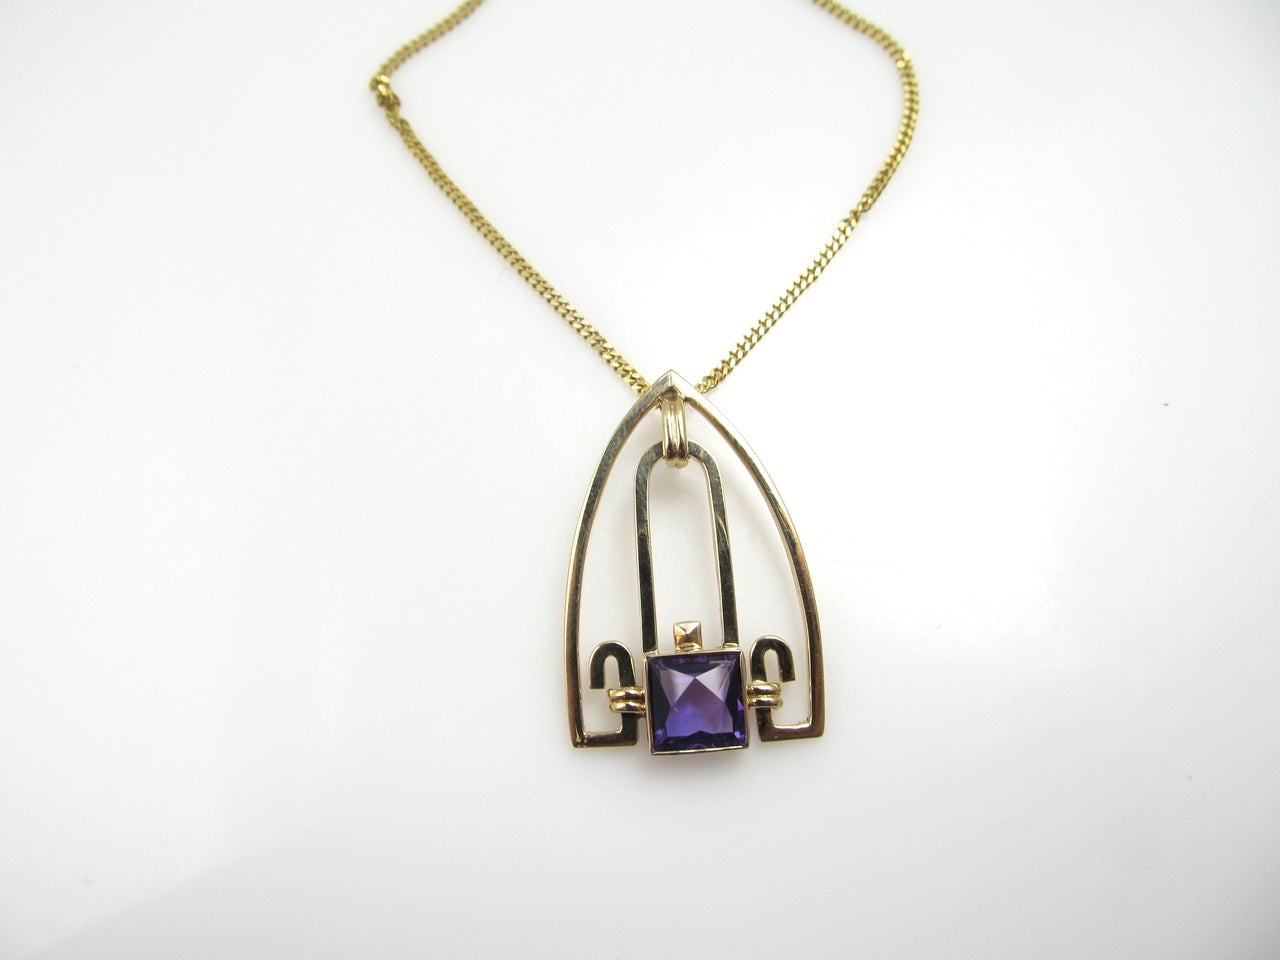 Art Deco 14k Yellow Gold Necklace With An Amethyst, Circa 1920